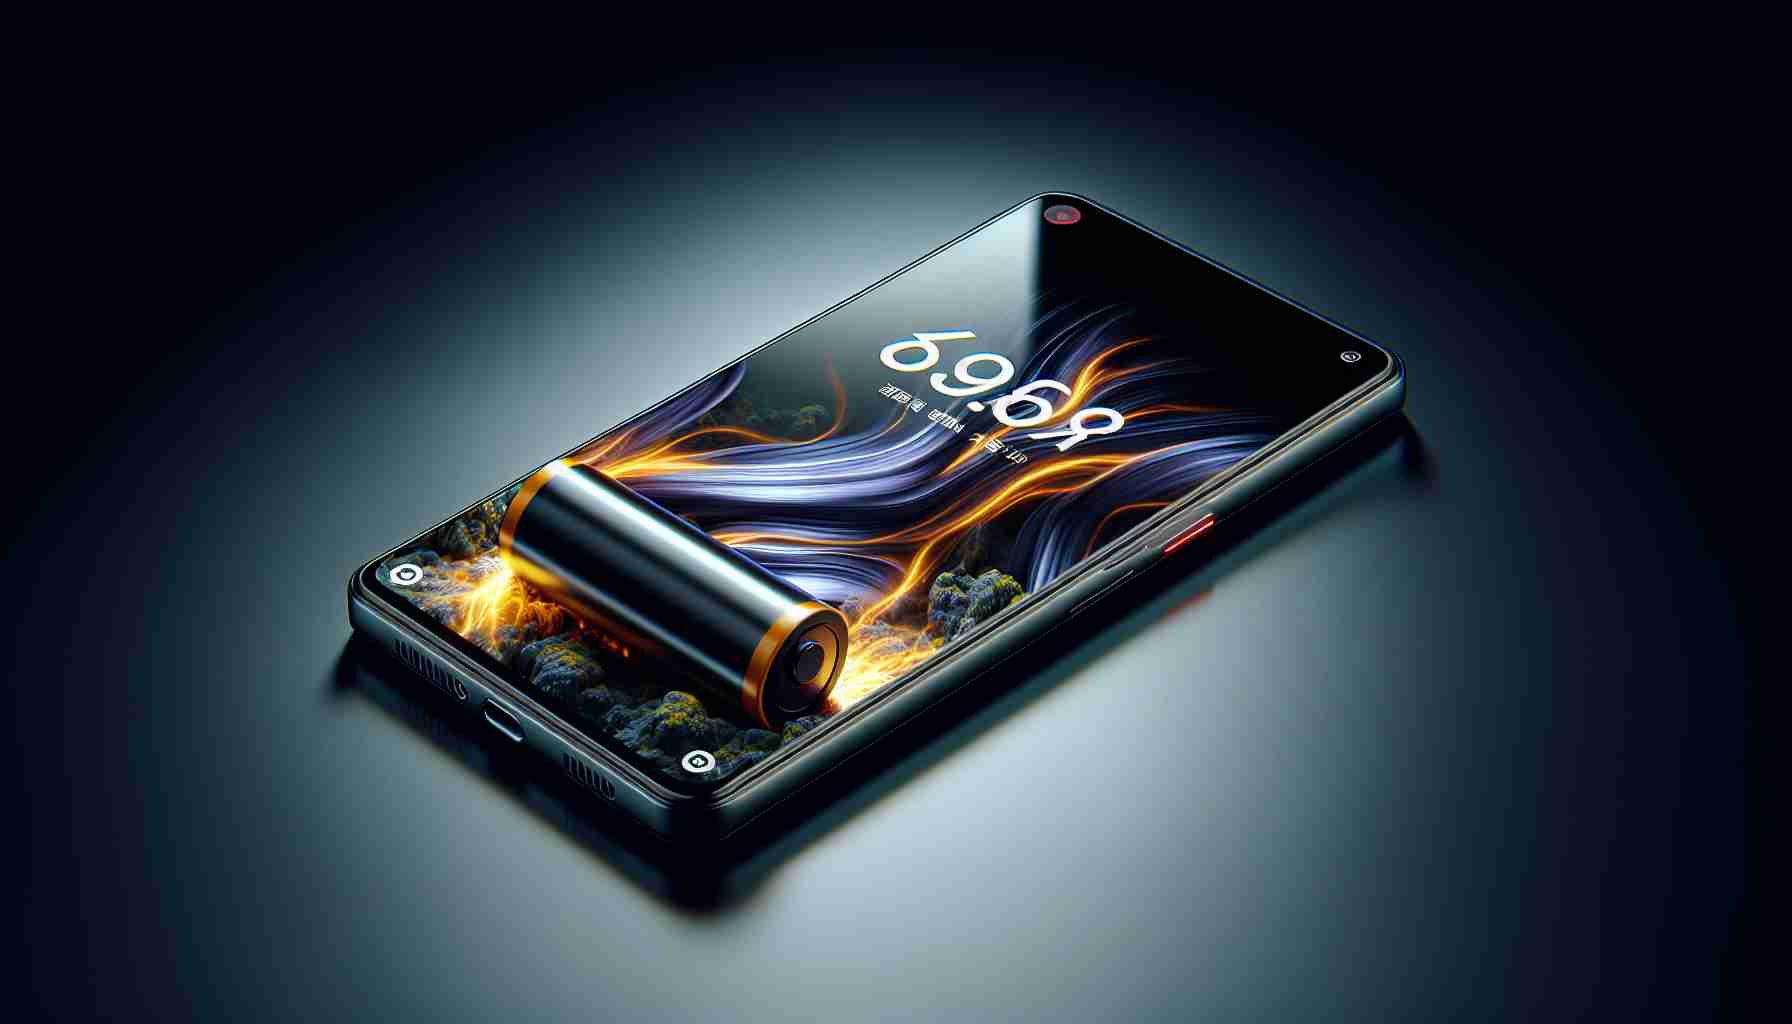 iQOO Introduces the Z9x Handset with Robust 6,000mAh Battery in India